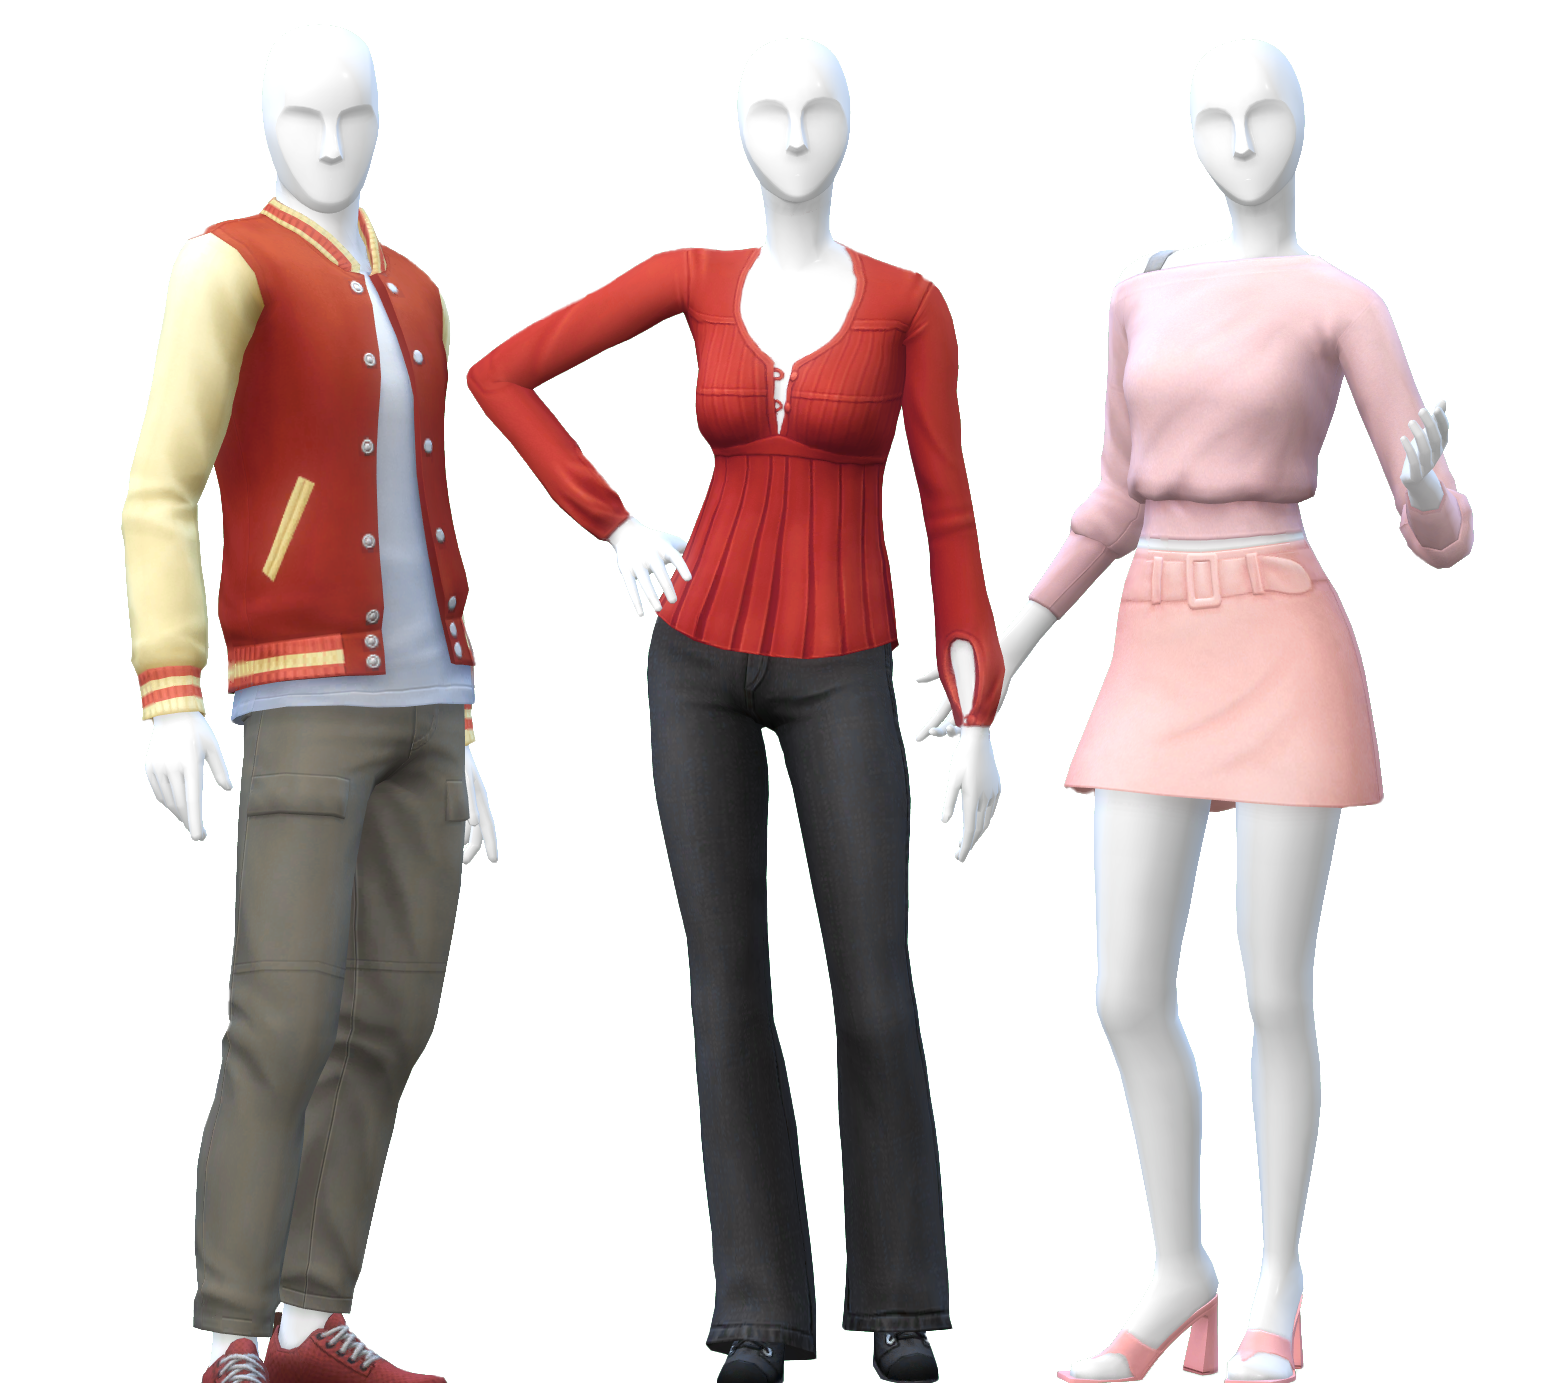 How to Change Your Work Outfit in The Sims 4